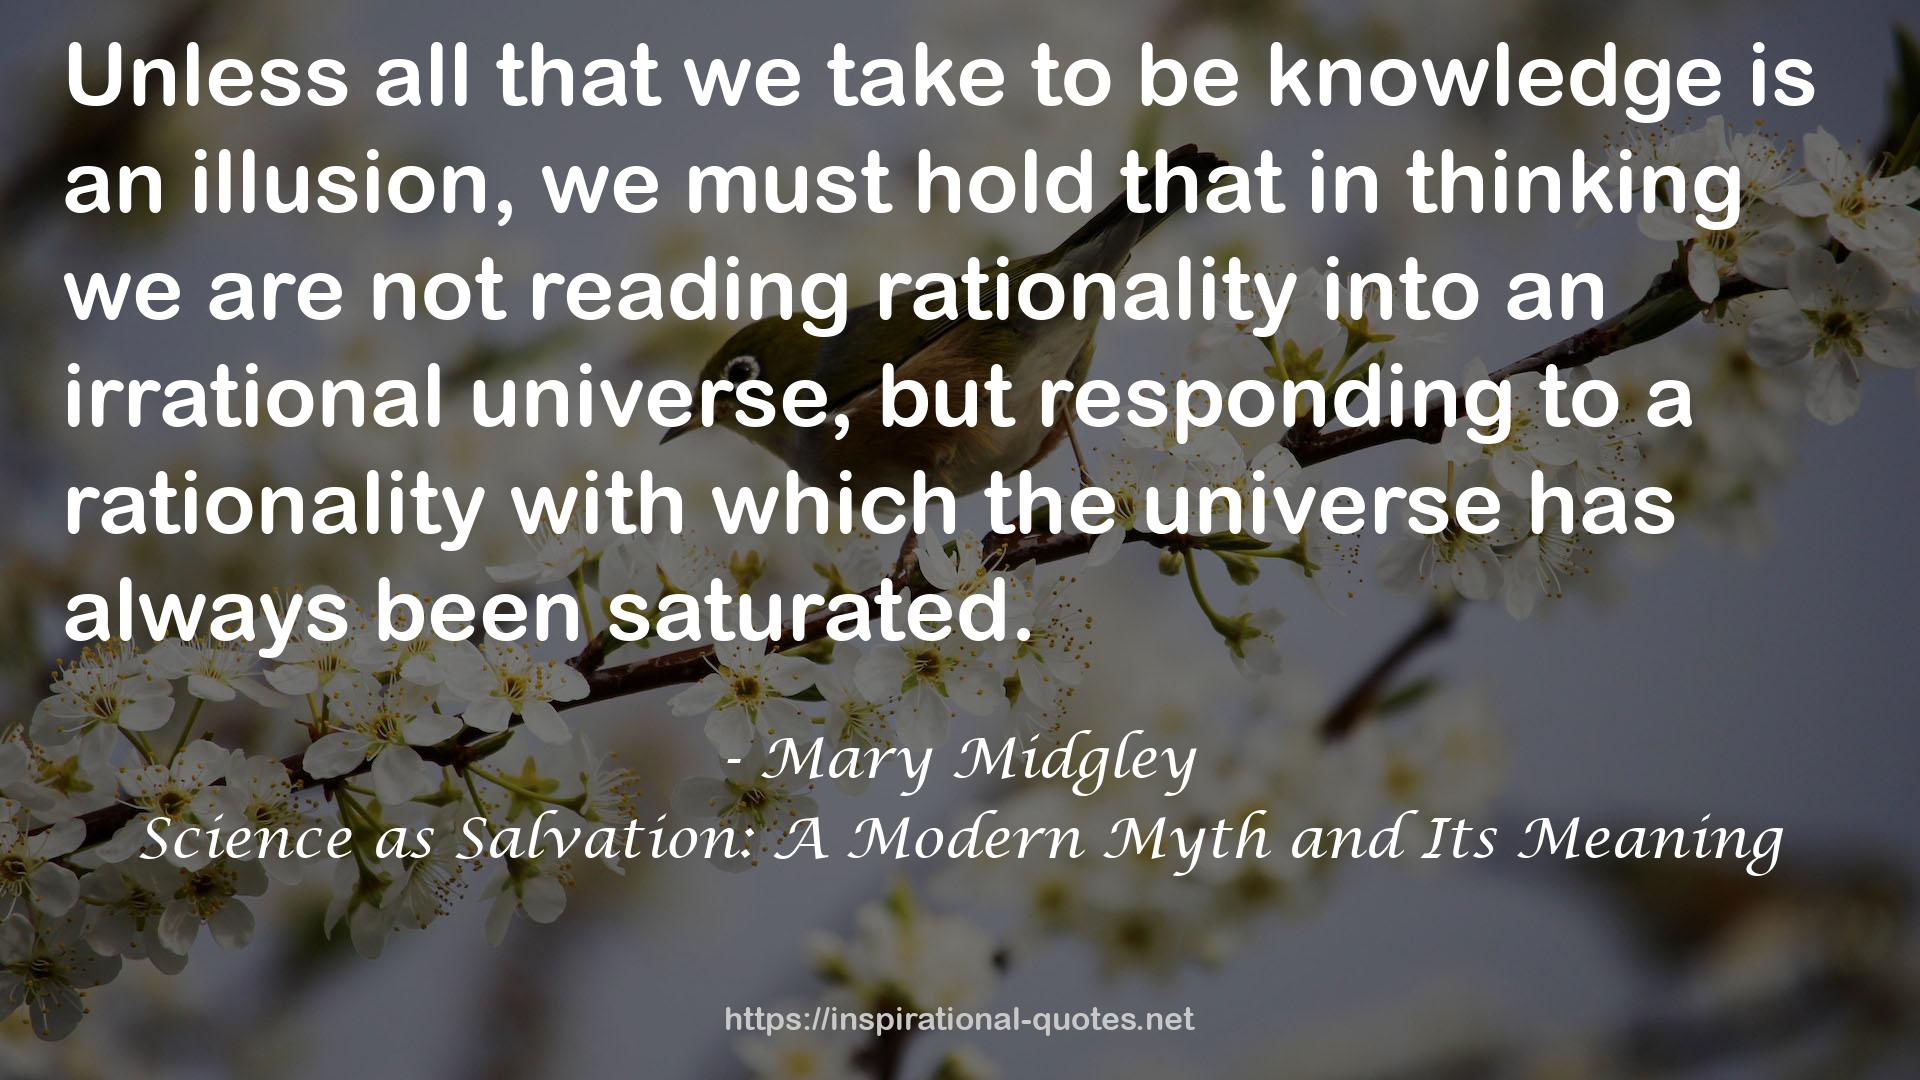 Science as Salvation: A Modern Myth and Its Meaning QUOTES